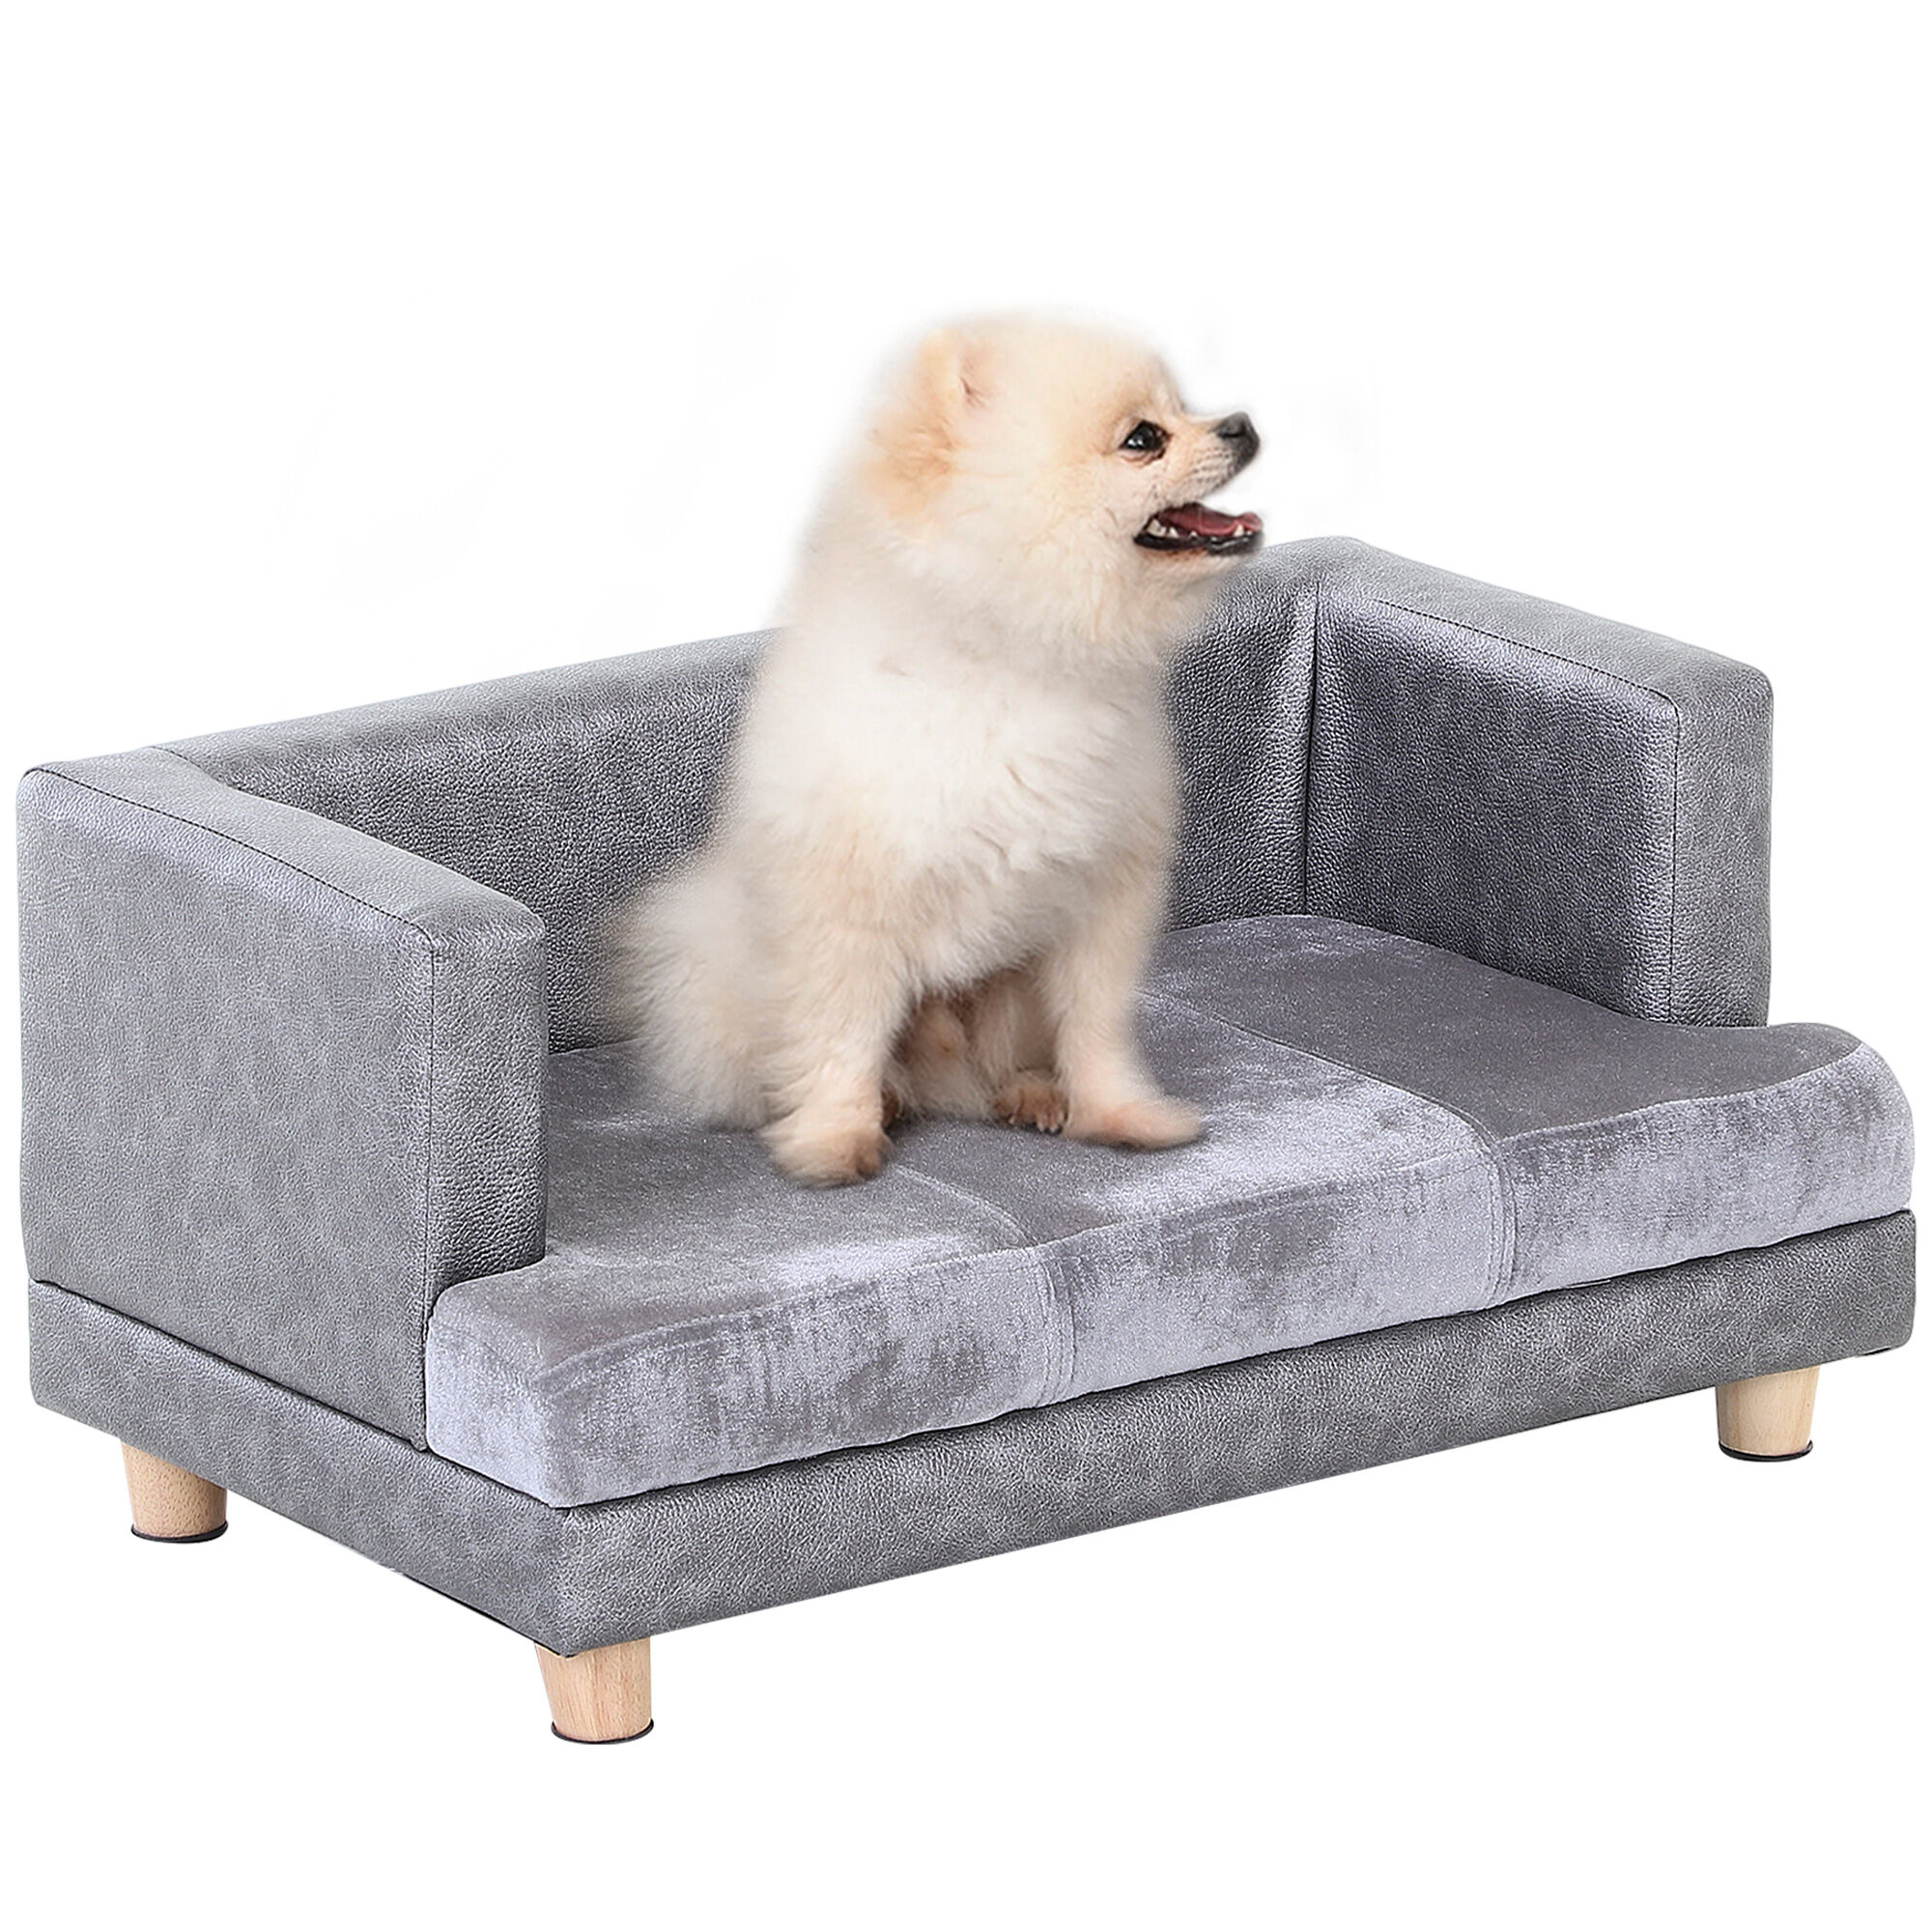 PawHut Pet Sofa Bed for Small Dogs Cats with Soft Fuzzy & Faux Leather Combo, Small Dog Couch with Safety Design, Grey, 27" x 16" x 12.5"